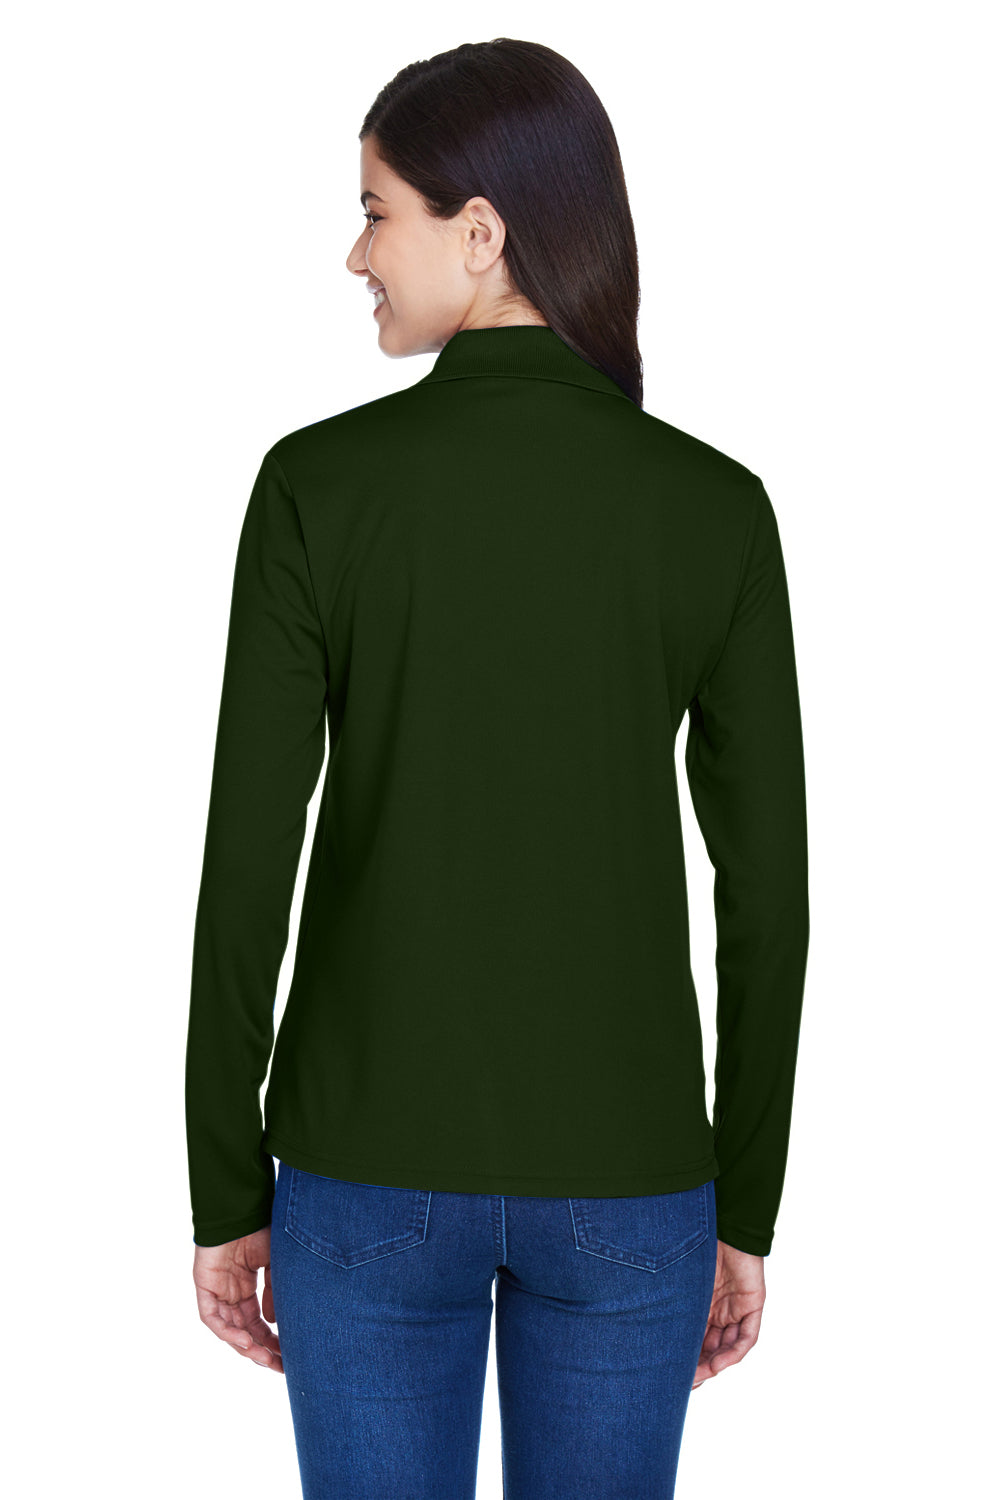 Core 365 78192 Womens Pinnacle Performance Moisture Wicking Long Sleeve Polo Shirt Forest Green Back